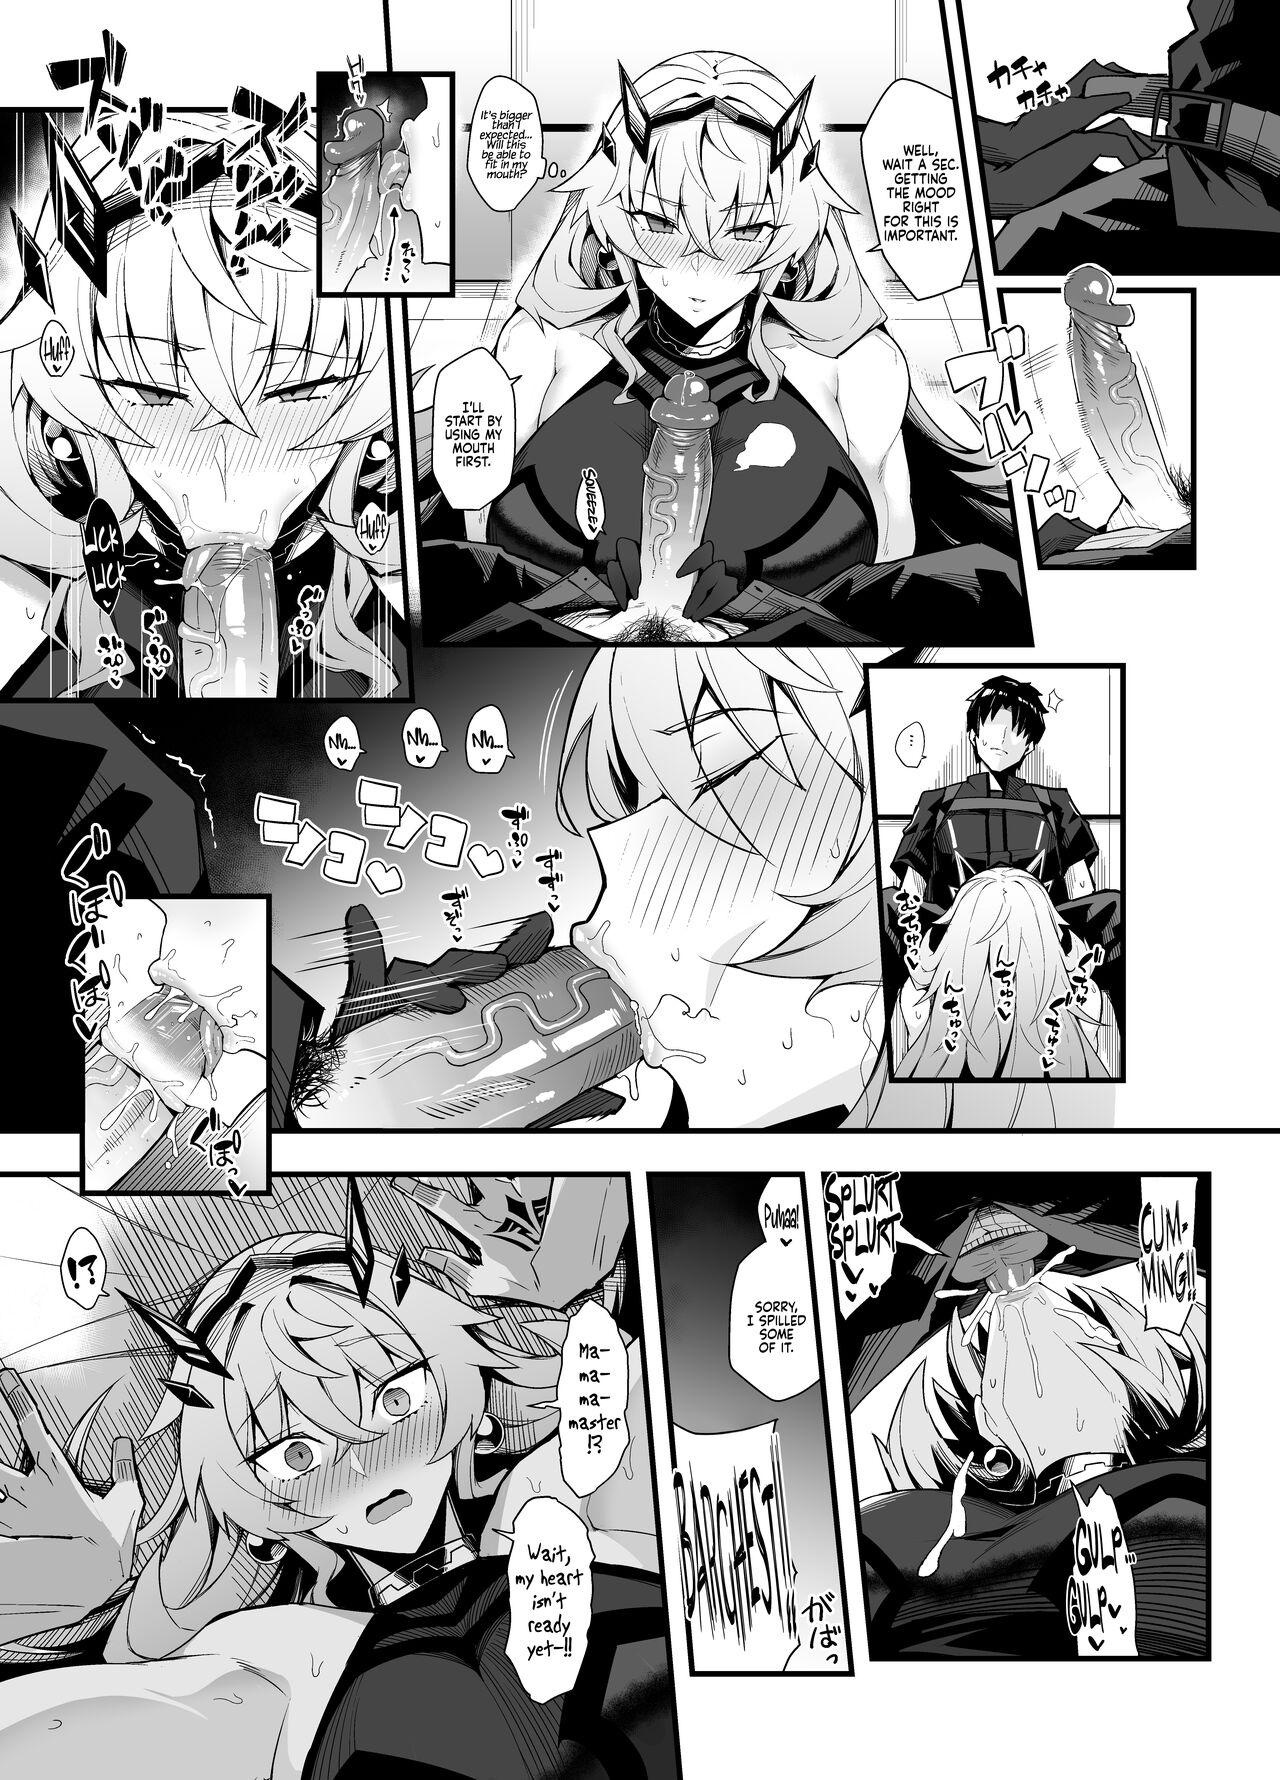 Assfucking Bageko to Asa made Ichaicha | Making out with Bageko Until Morning - Fate grand order Stripper - Page 3